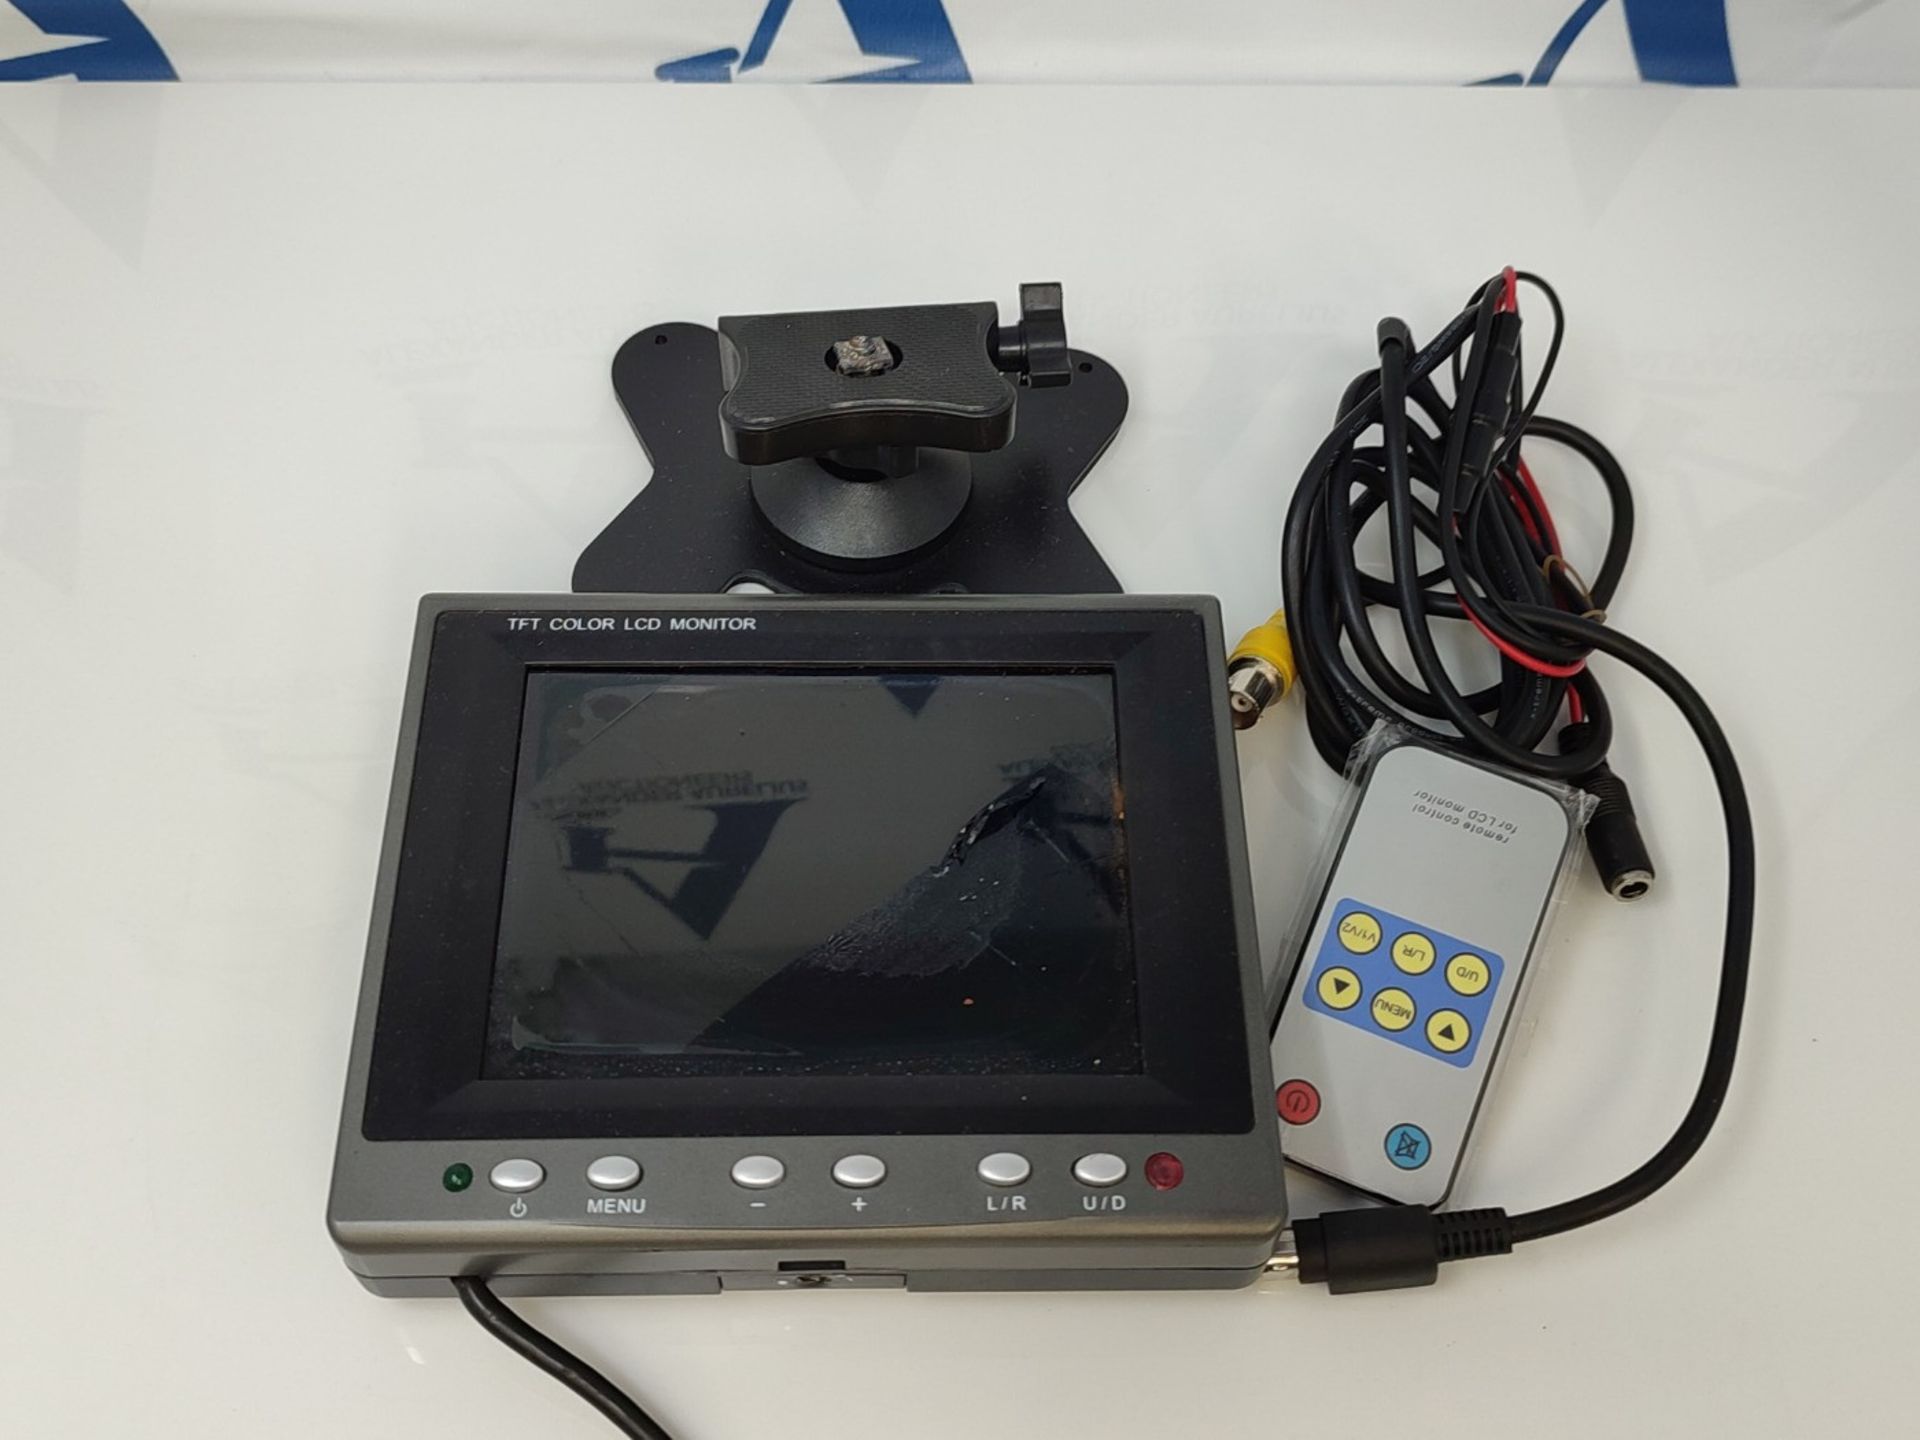 Genie LM-5601 color LCD monitor